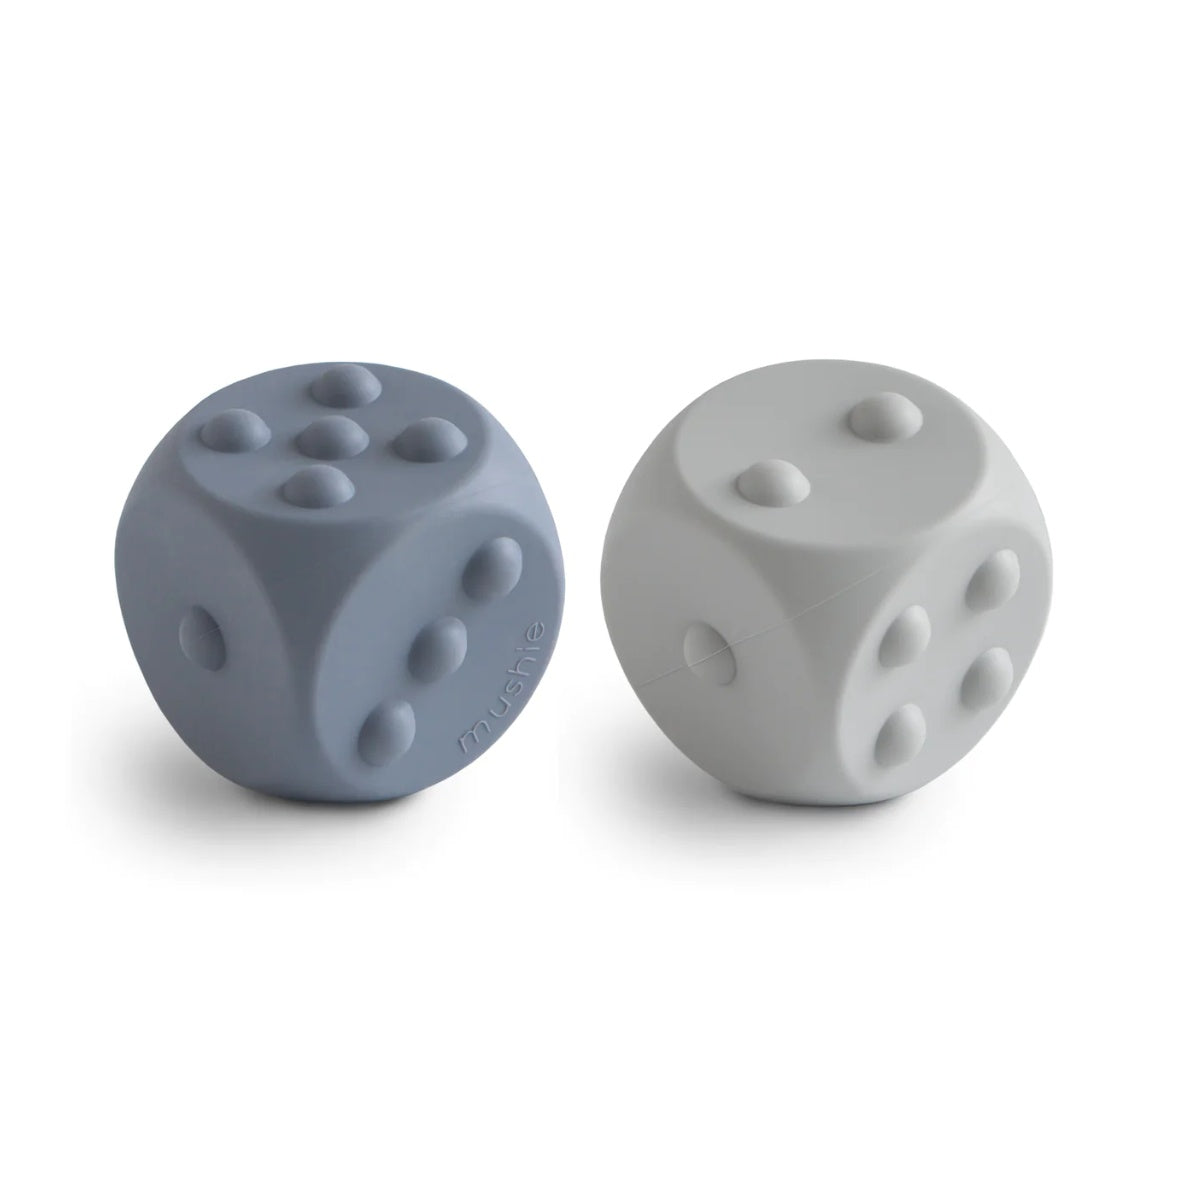 Mushie Dice Press Toy 2-pack Tradewinds/Stone